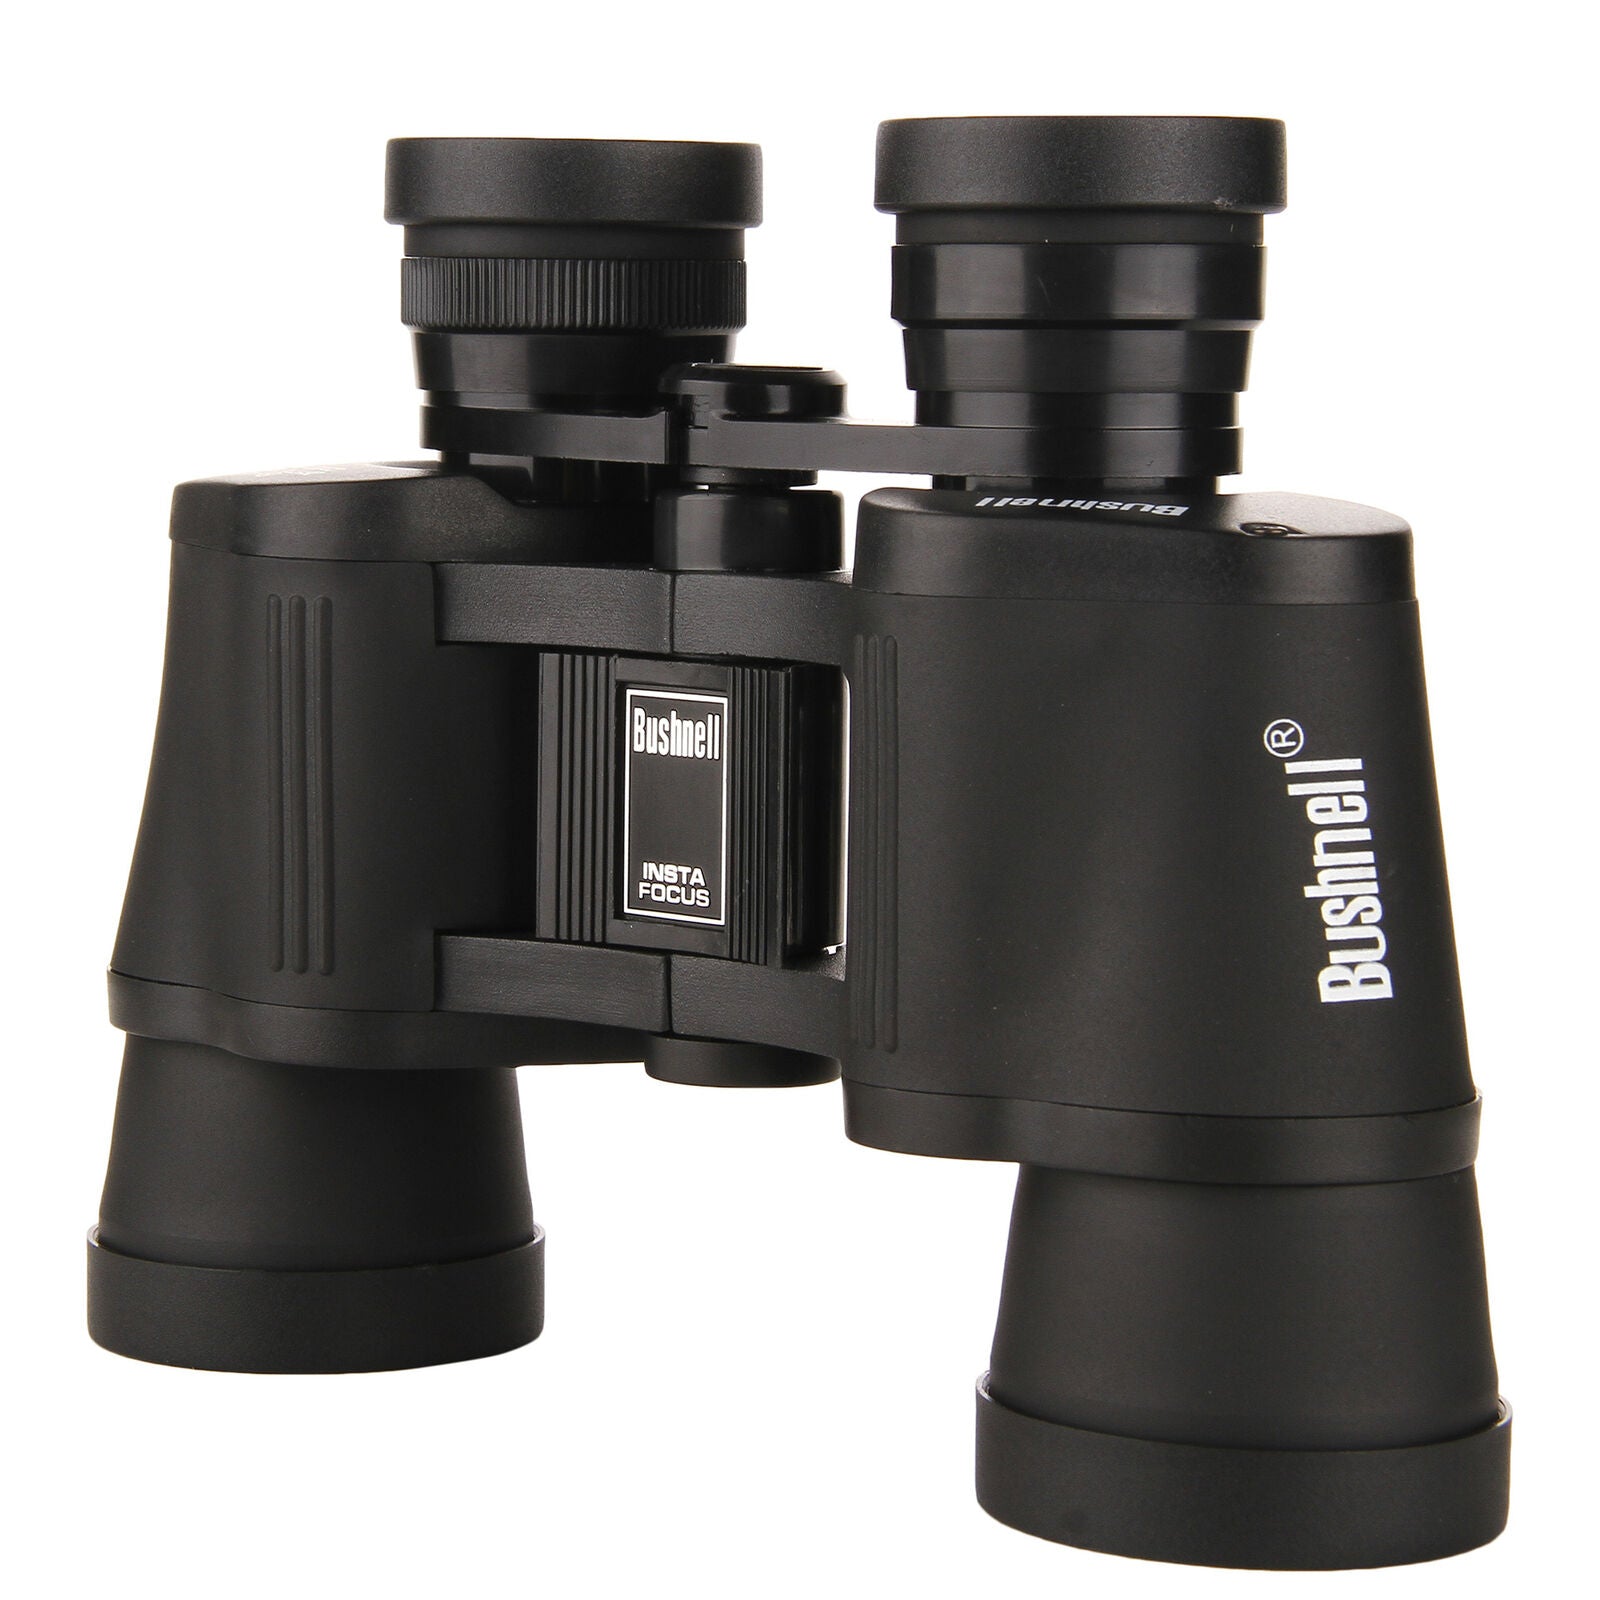 Bushnell 8x40 Common Telescope High Magnification Binoculars Outdoor Portable